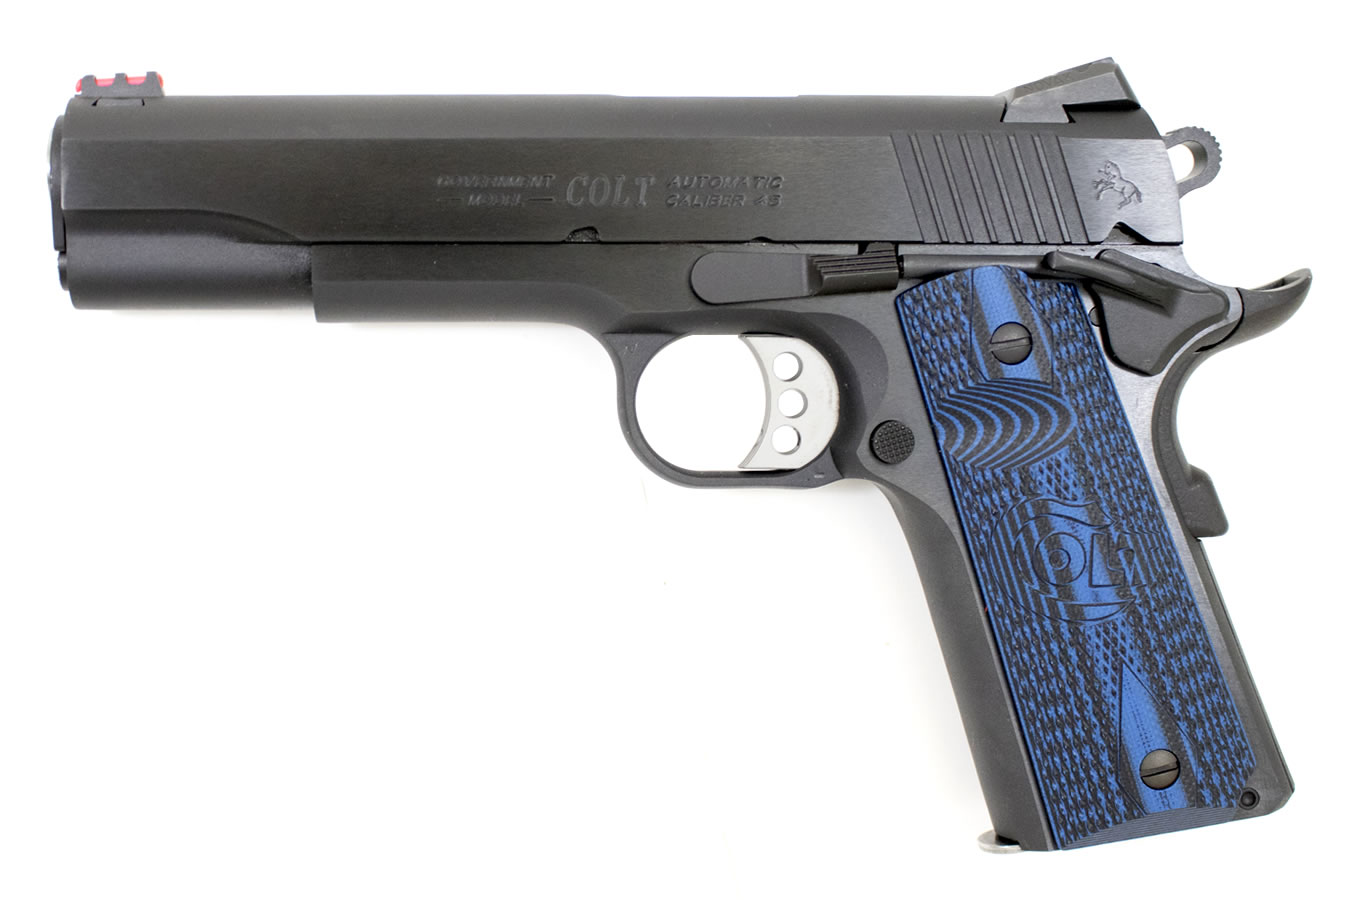 No. 18 Best Selling: COLT 1911 SERIES 70 COMPETITION 45 ACP